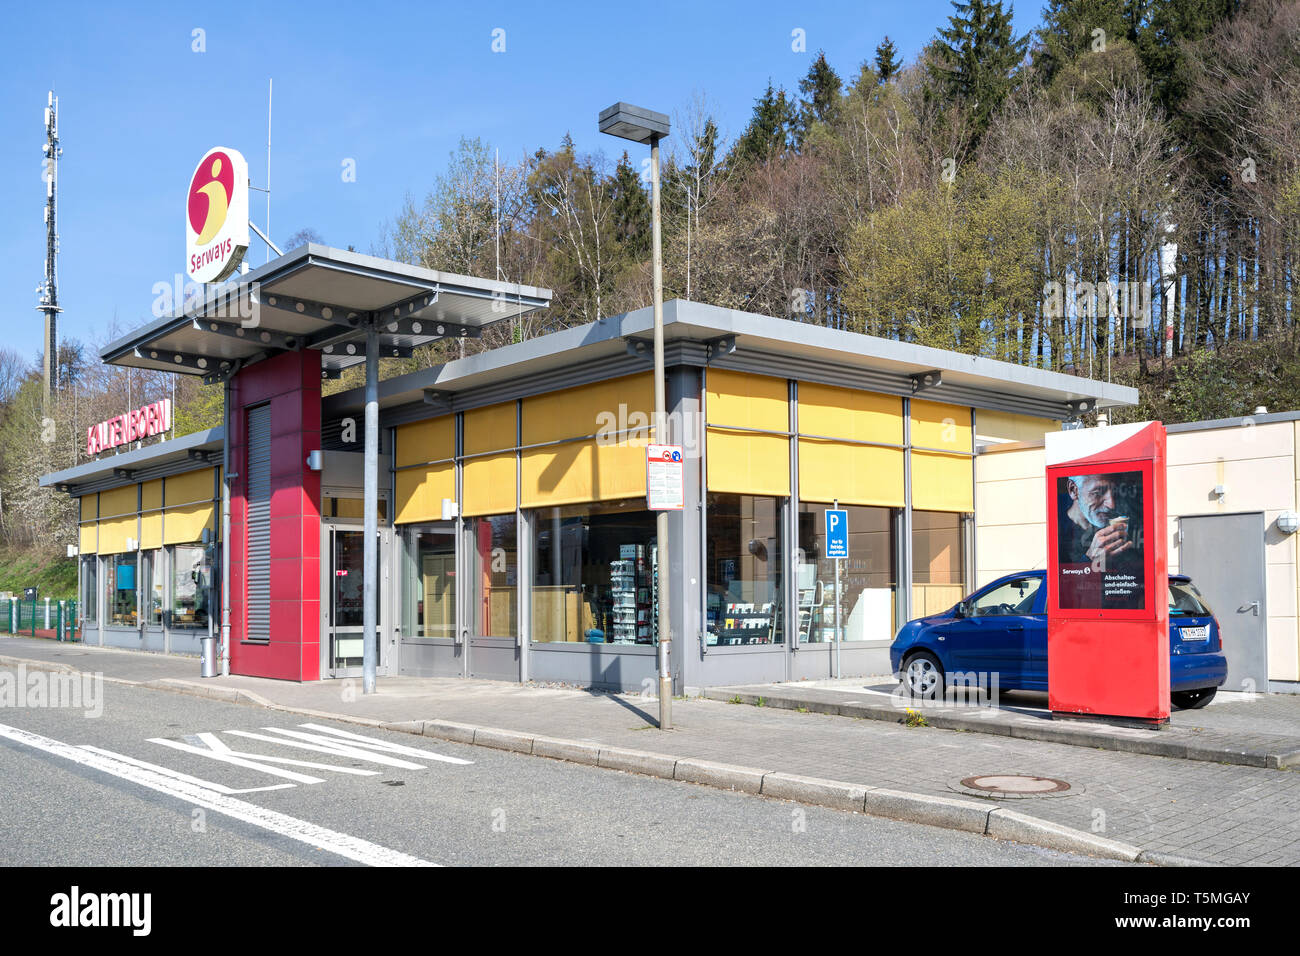 Serways restaurant Kaltenborn Ost. Serways is a brand of Tank & Rast, which leases, operates and manages motorway service stations in Germany. Stock Photo